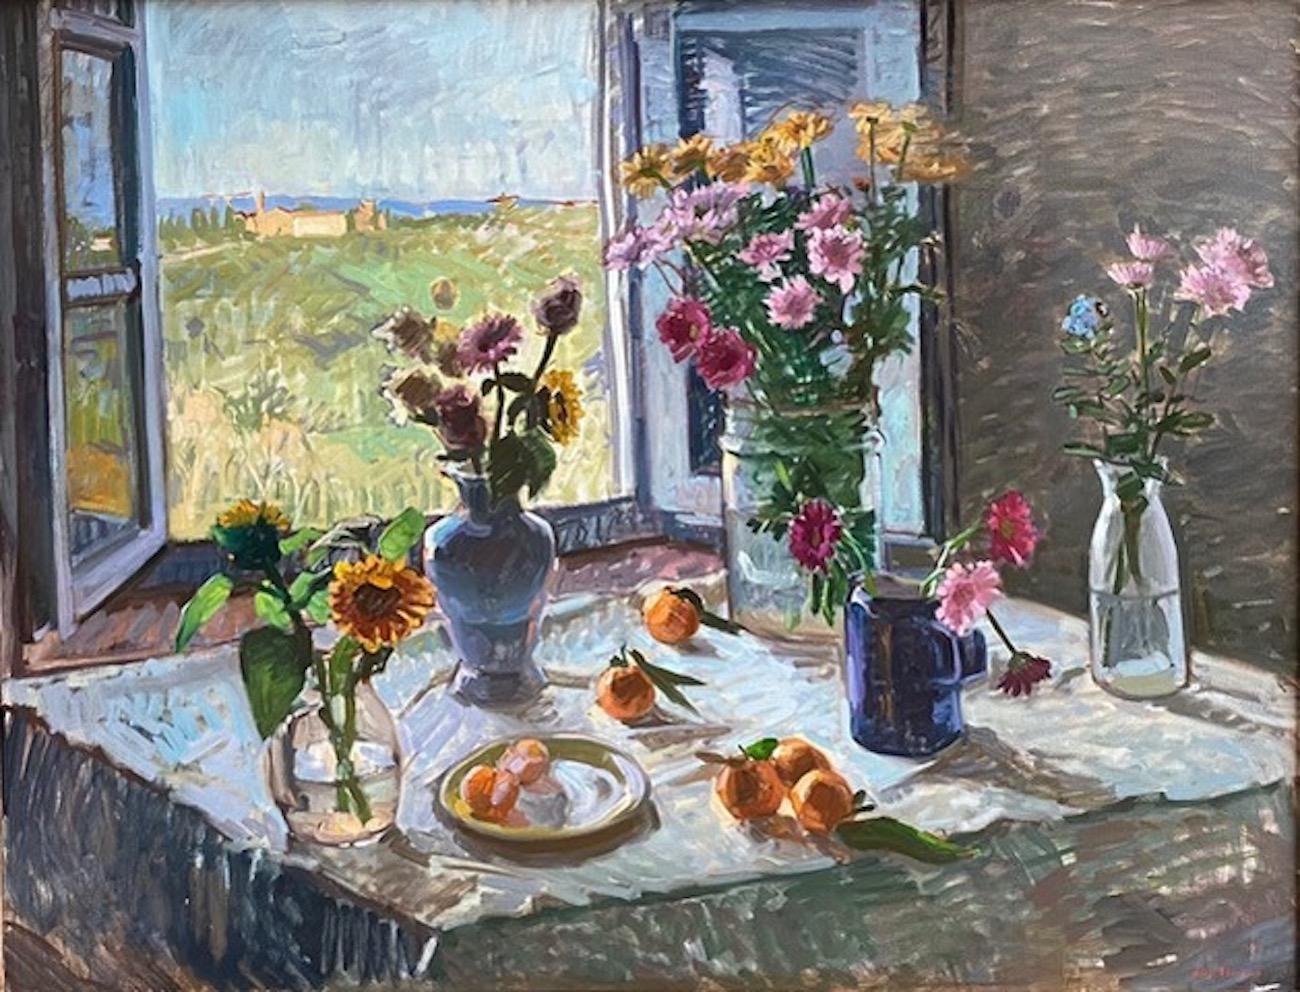 Still-Life Painting Amy Florence - "Looking Towards Bonazza" nature morte contemporaine lumineuse avec paysage toscan.